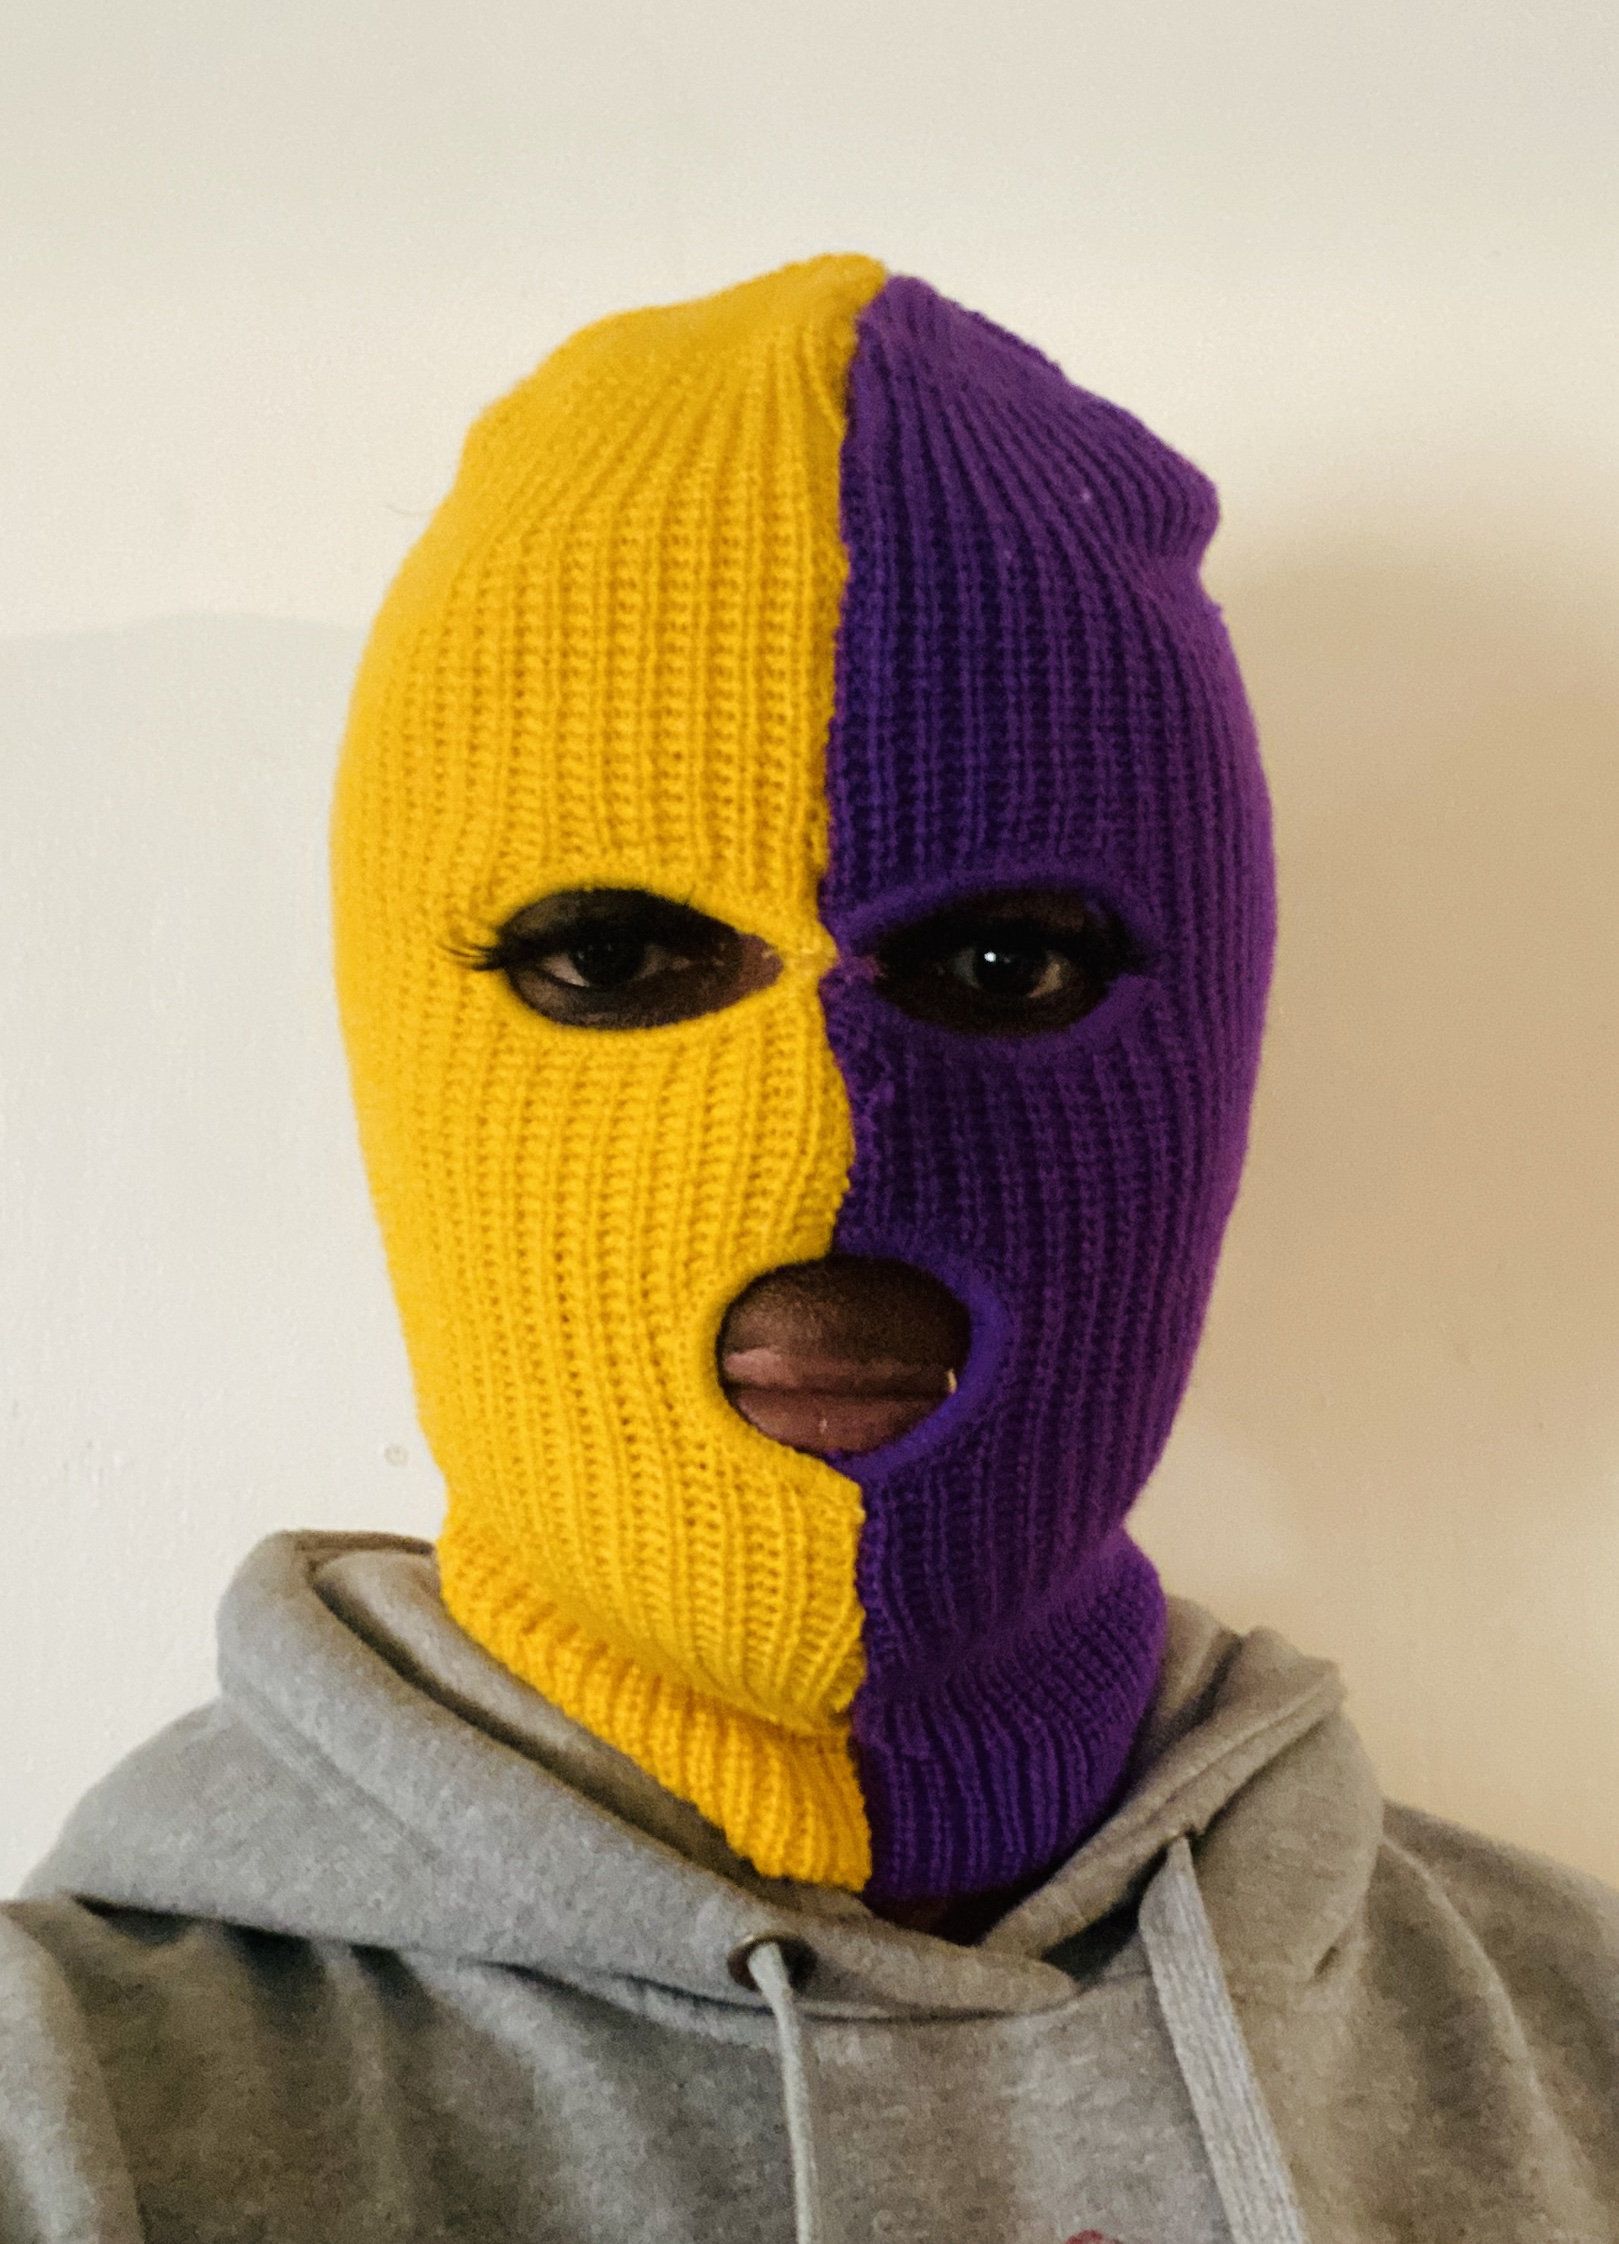 Ski Mask Lakers colors 3 holes purple and yellow. Ski mask, Lakers colors, Purple